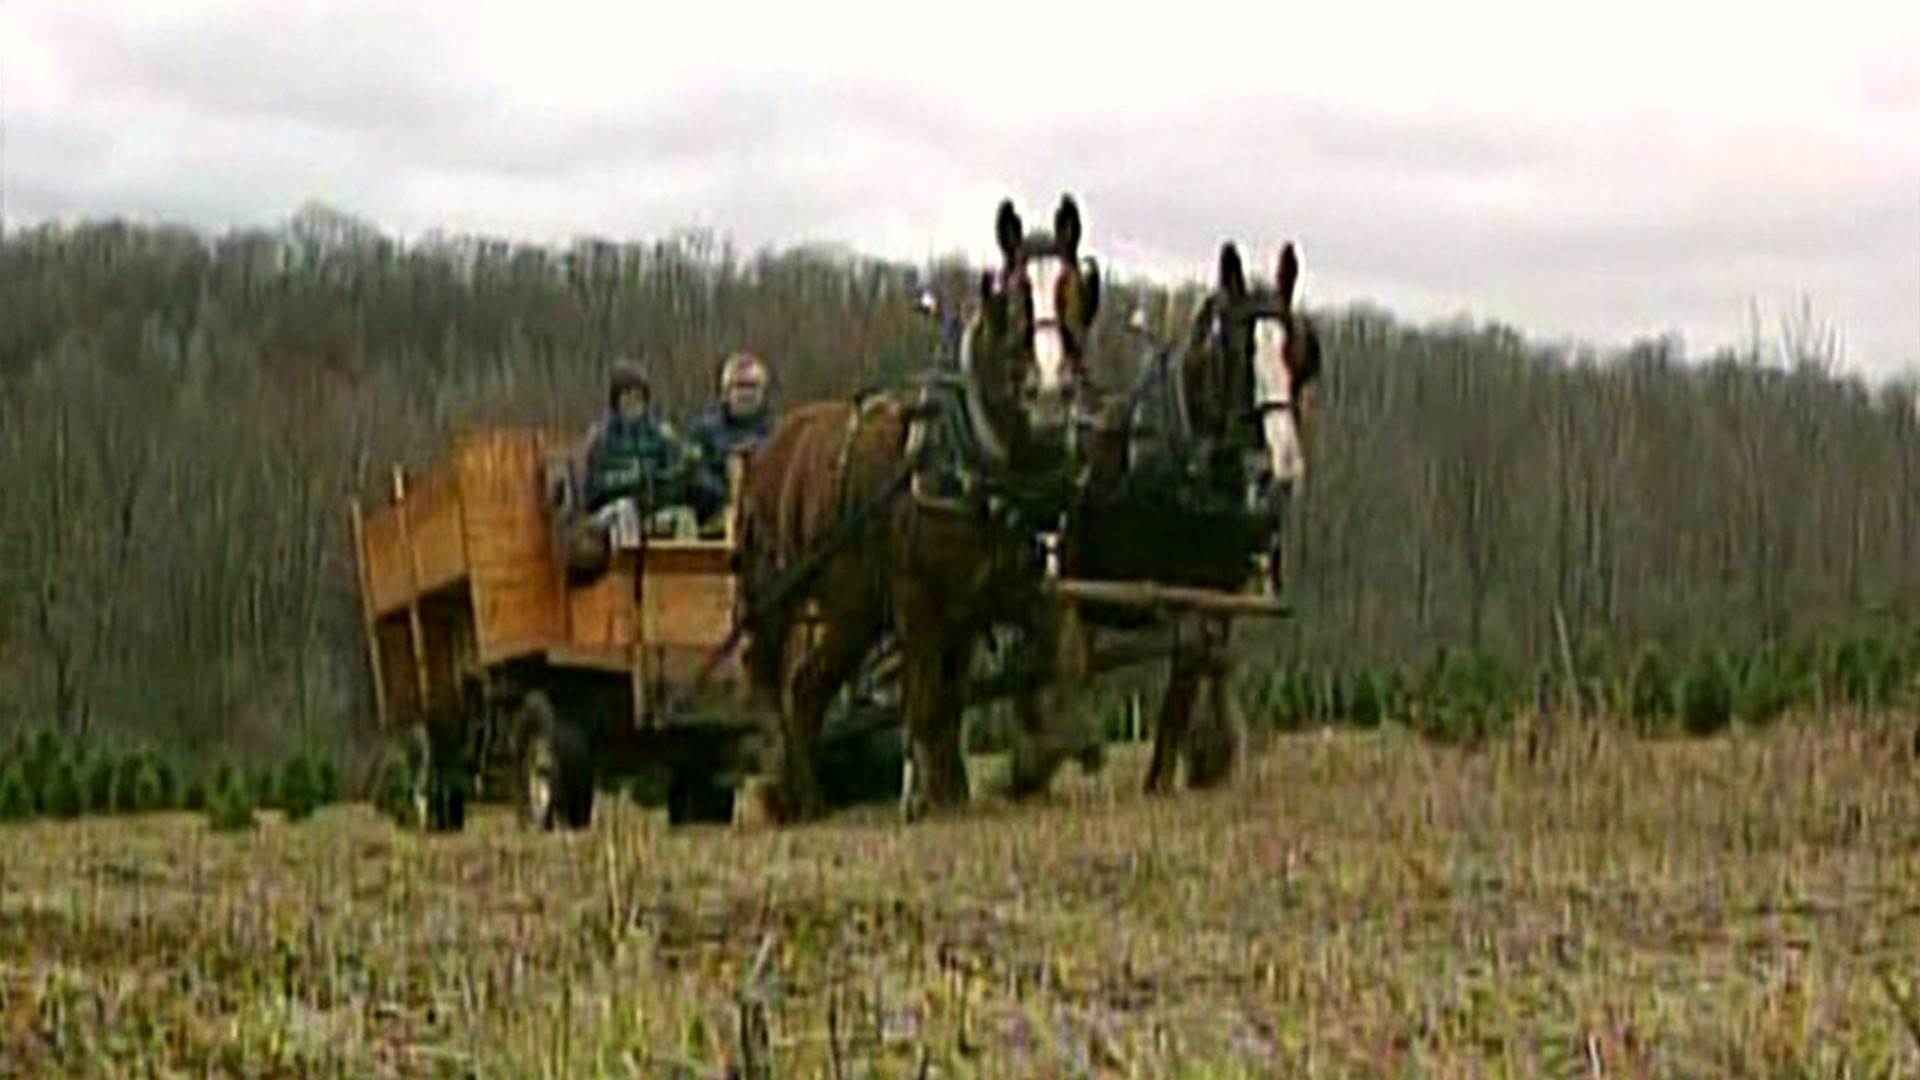 Getting Christmas Trees on a Horse-Drawn Wagon